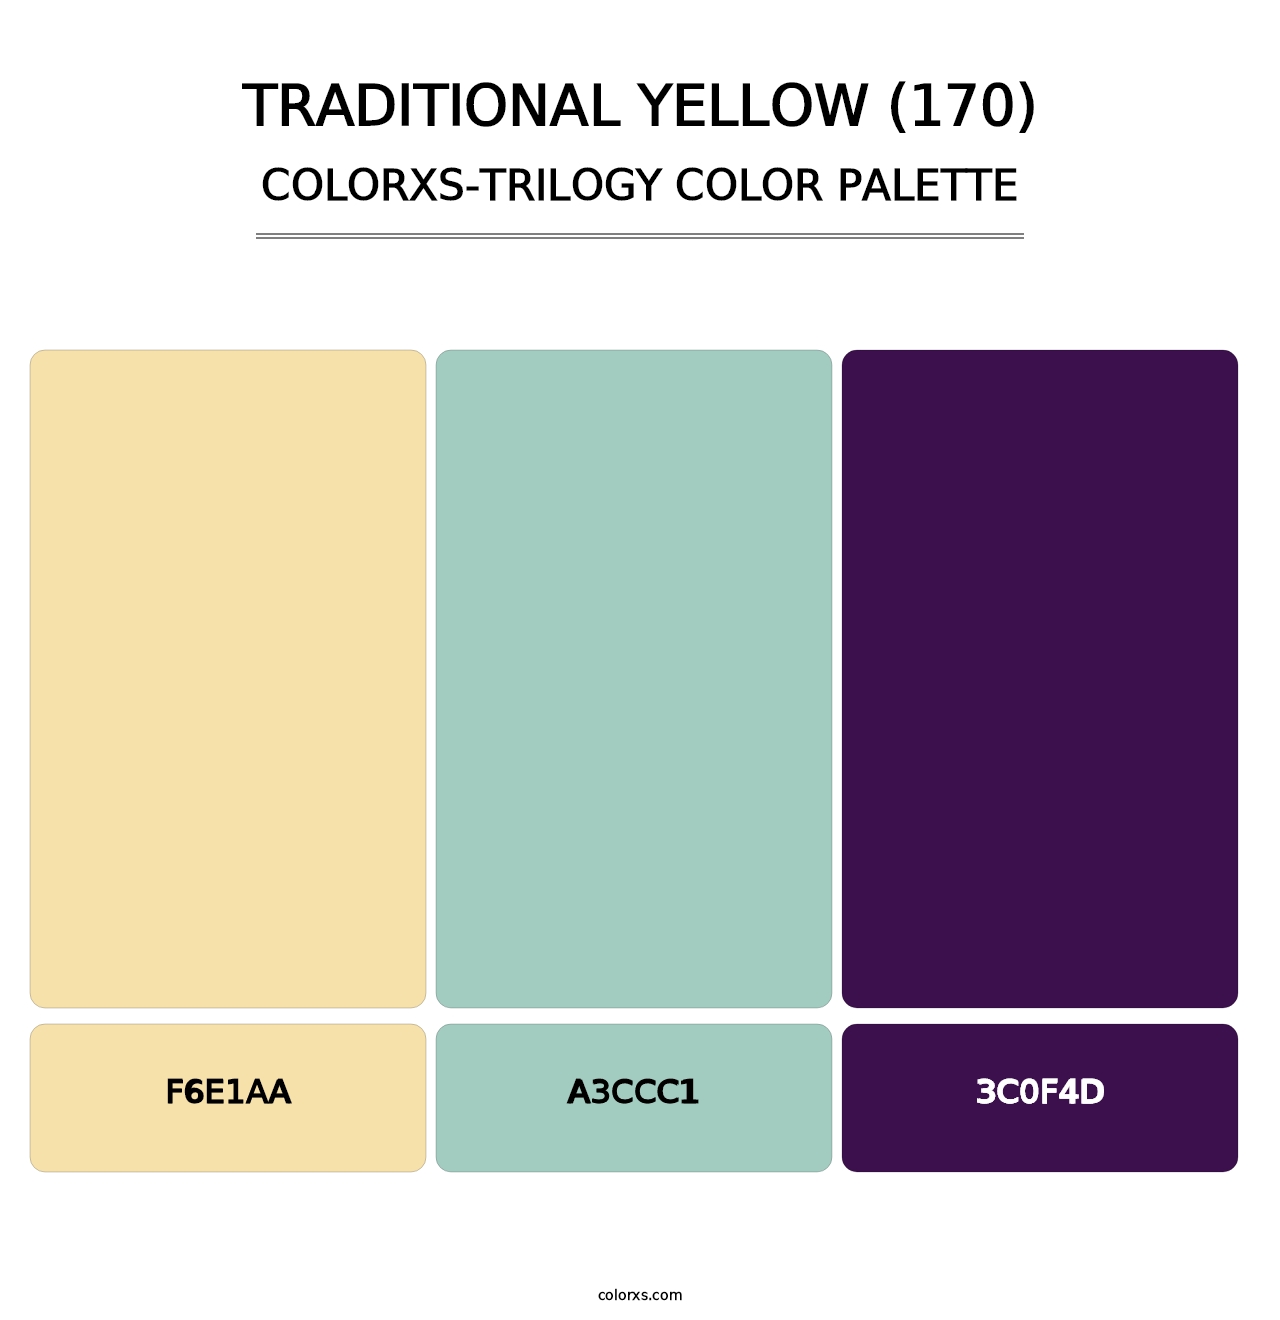 Traditional Yellow (170) - Colorxs Trilogy Palette